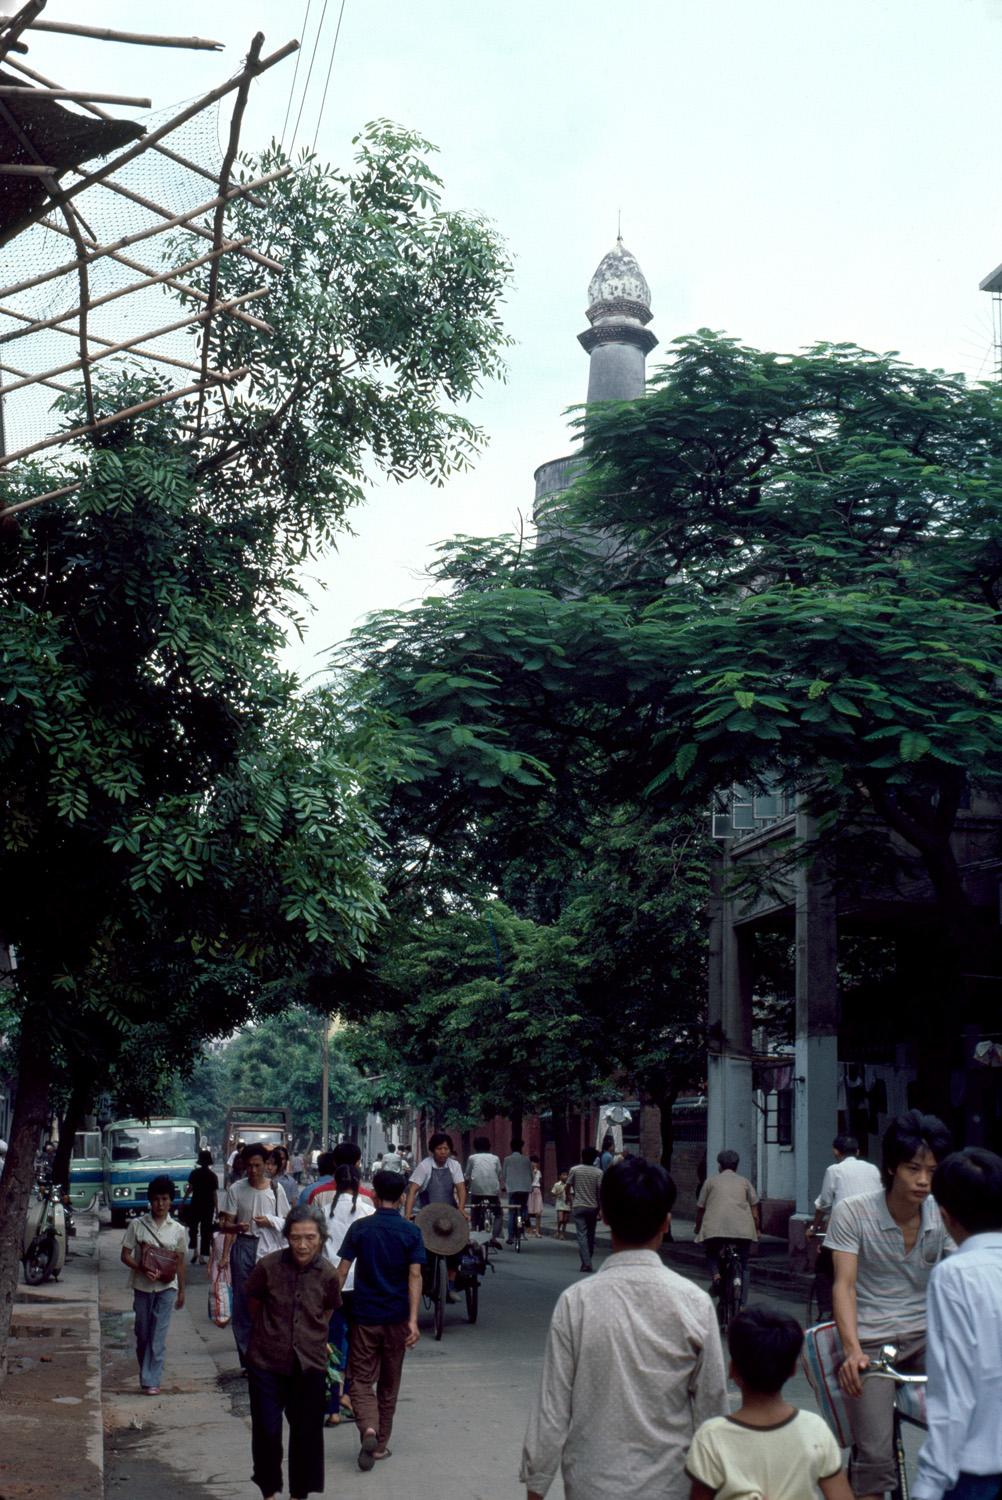 Street façade with light tower rising above the trees